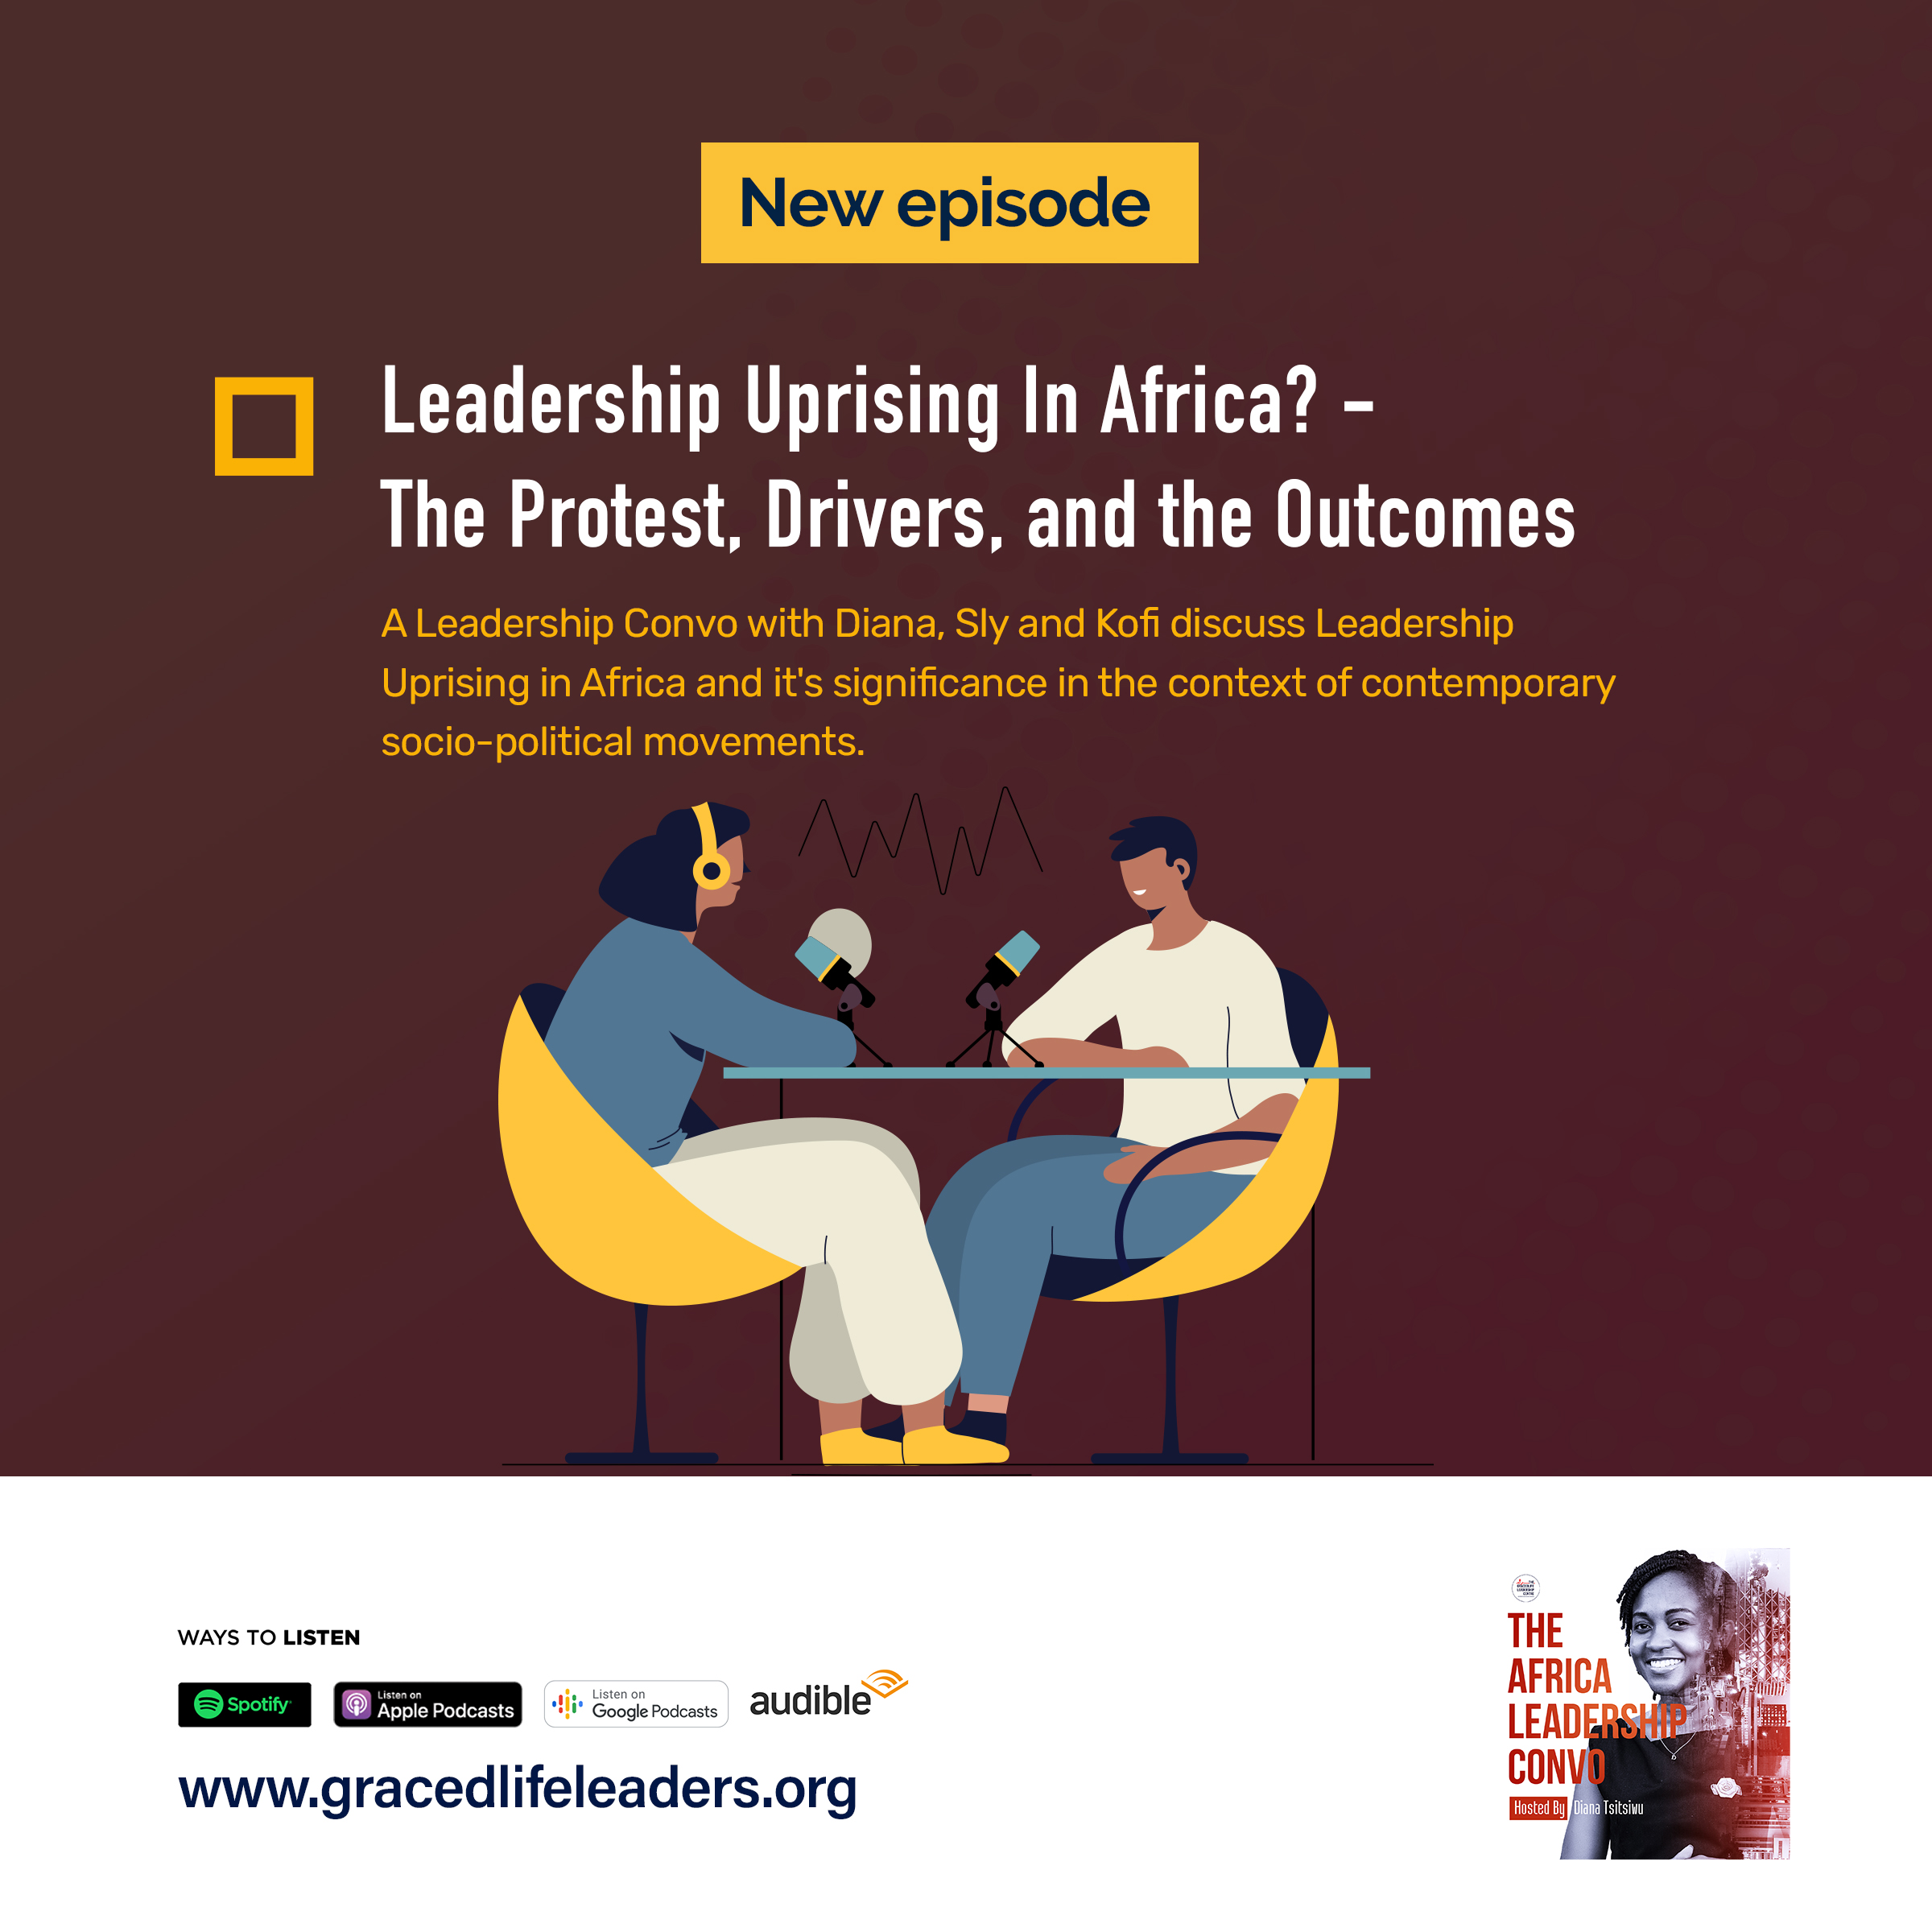 Leadership Uprising In Africa? - The Protest, Drivers, and the Outcomes